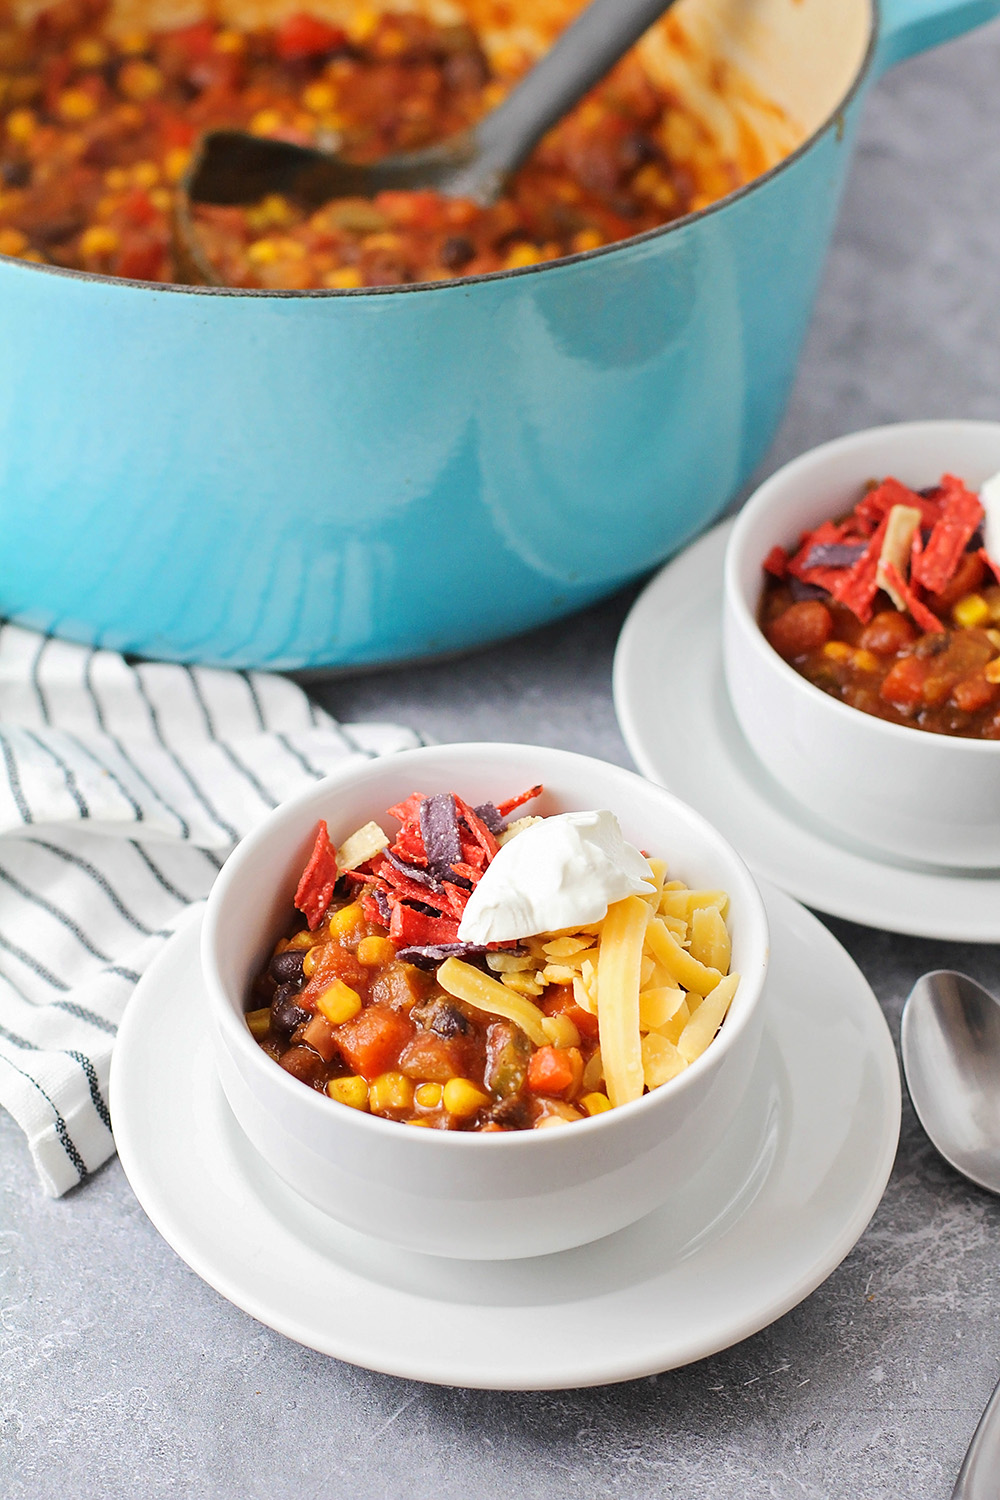 This thick and hearty veggie chili is full of delicious flavors, and so easy to make!